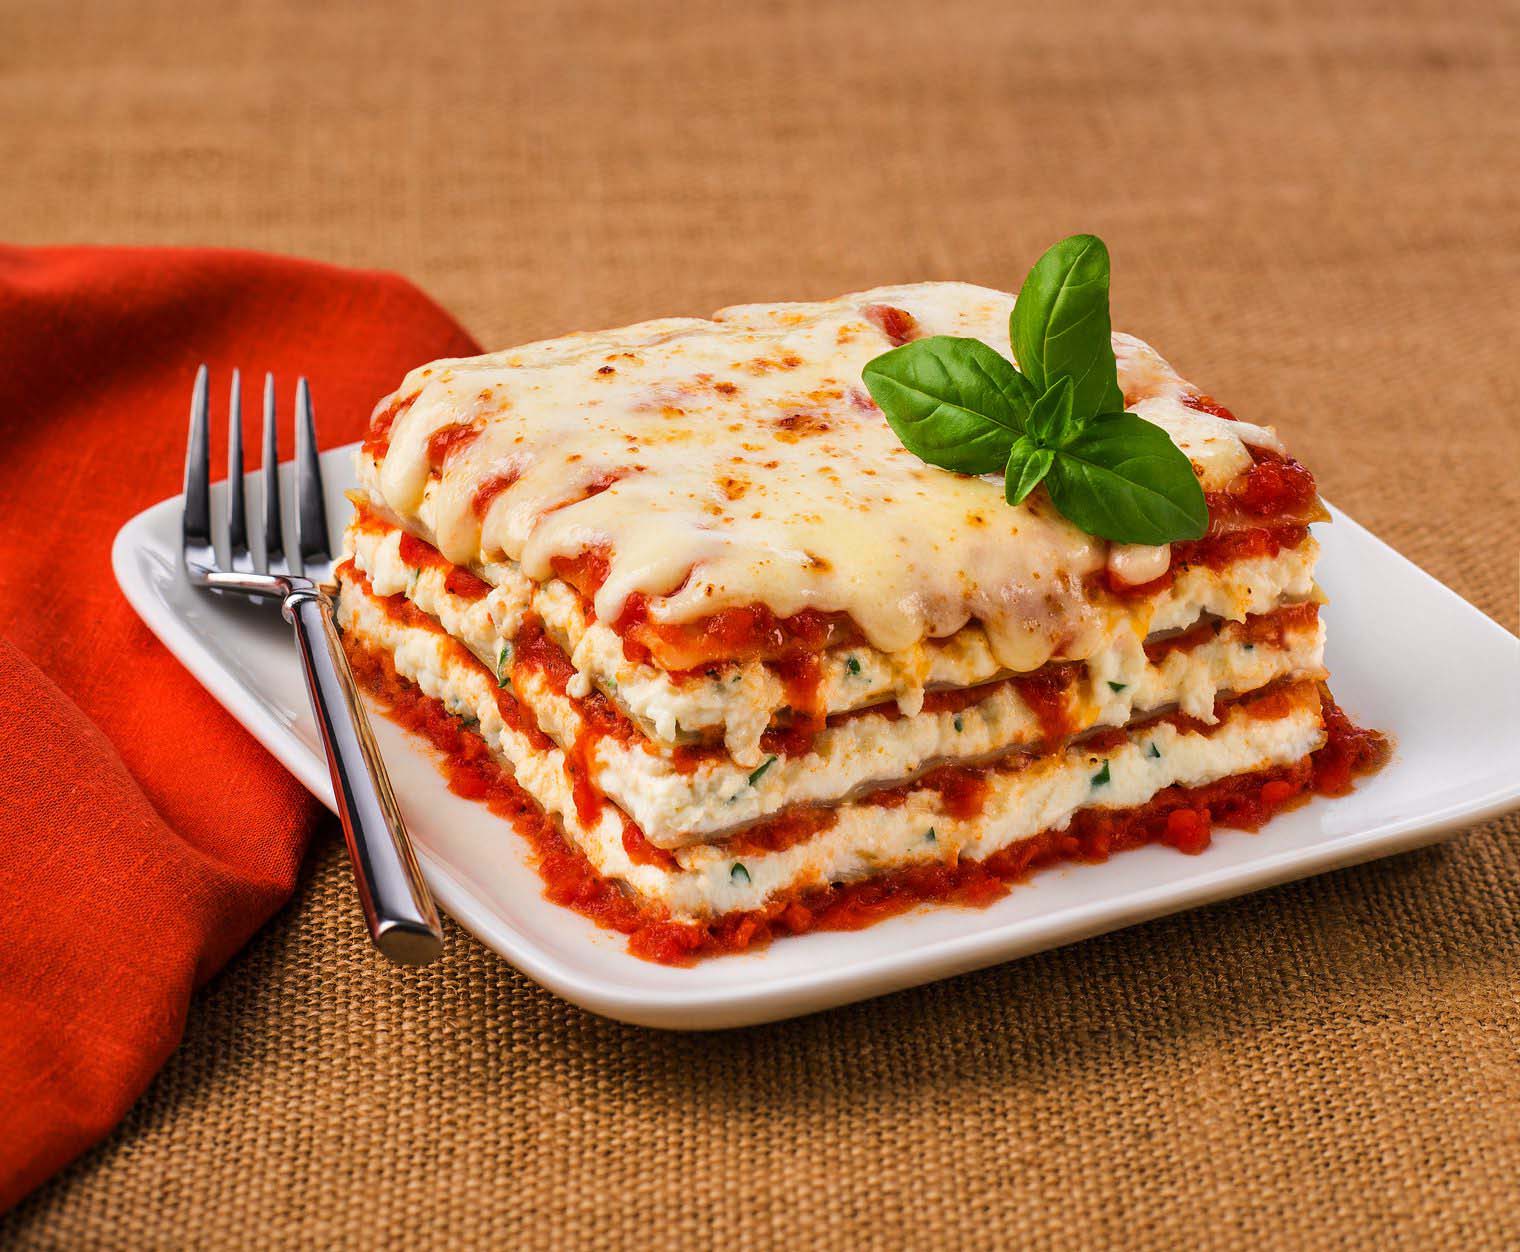 traditional lasagna recipe without ricotta cheese